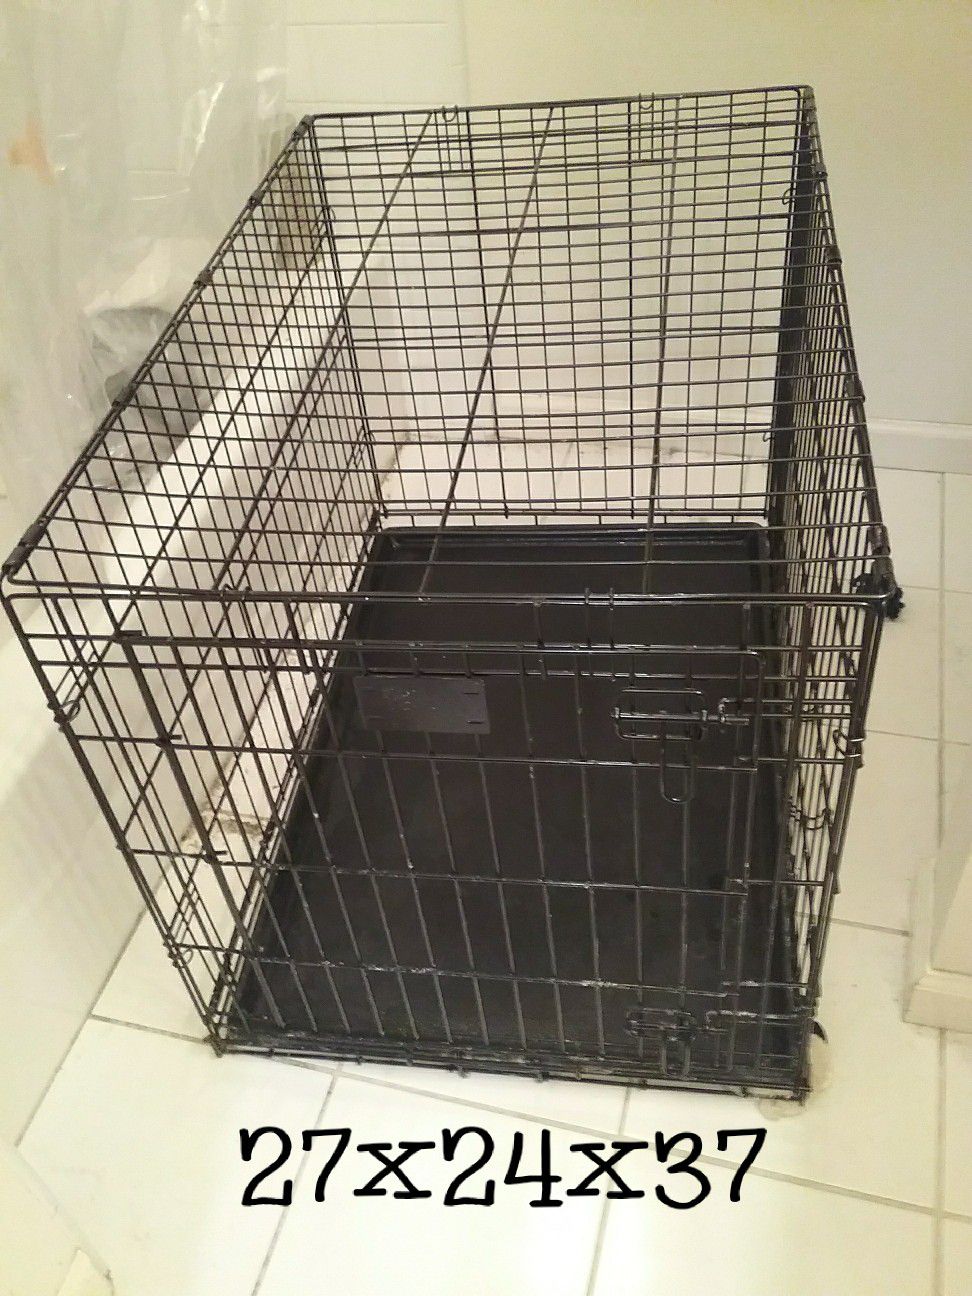 Crate XL Dog crate with divider used excellent condition